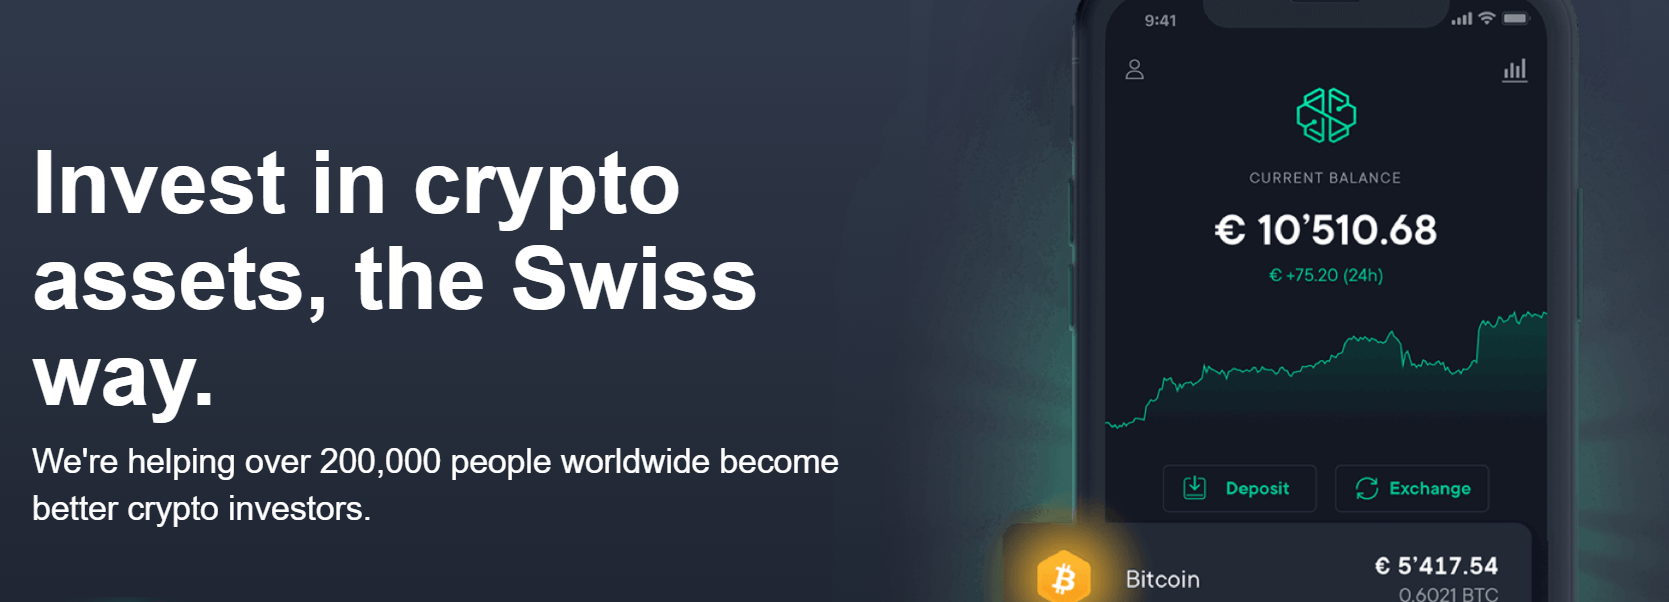 Get Up To €100 (£90) FREE From Swissborg